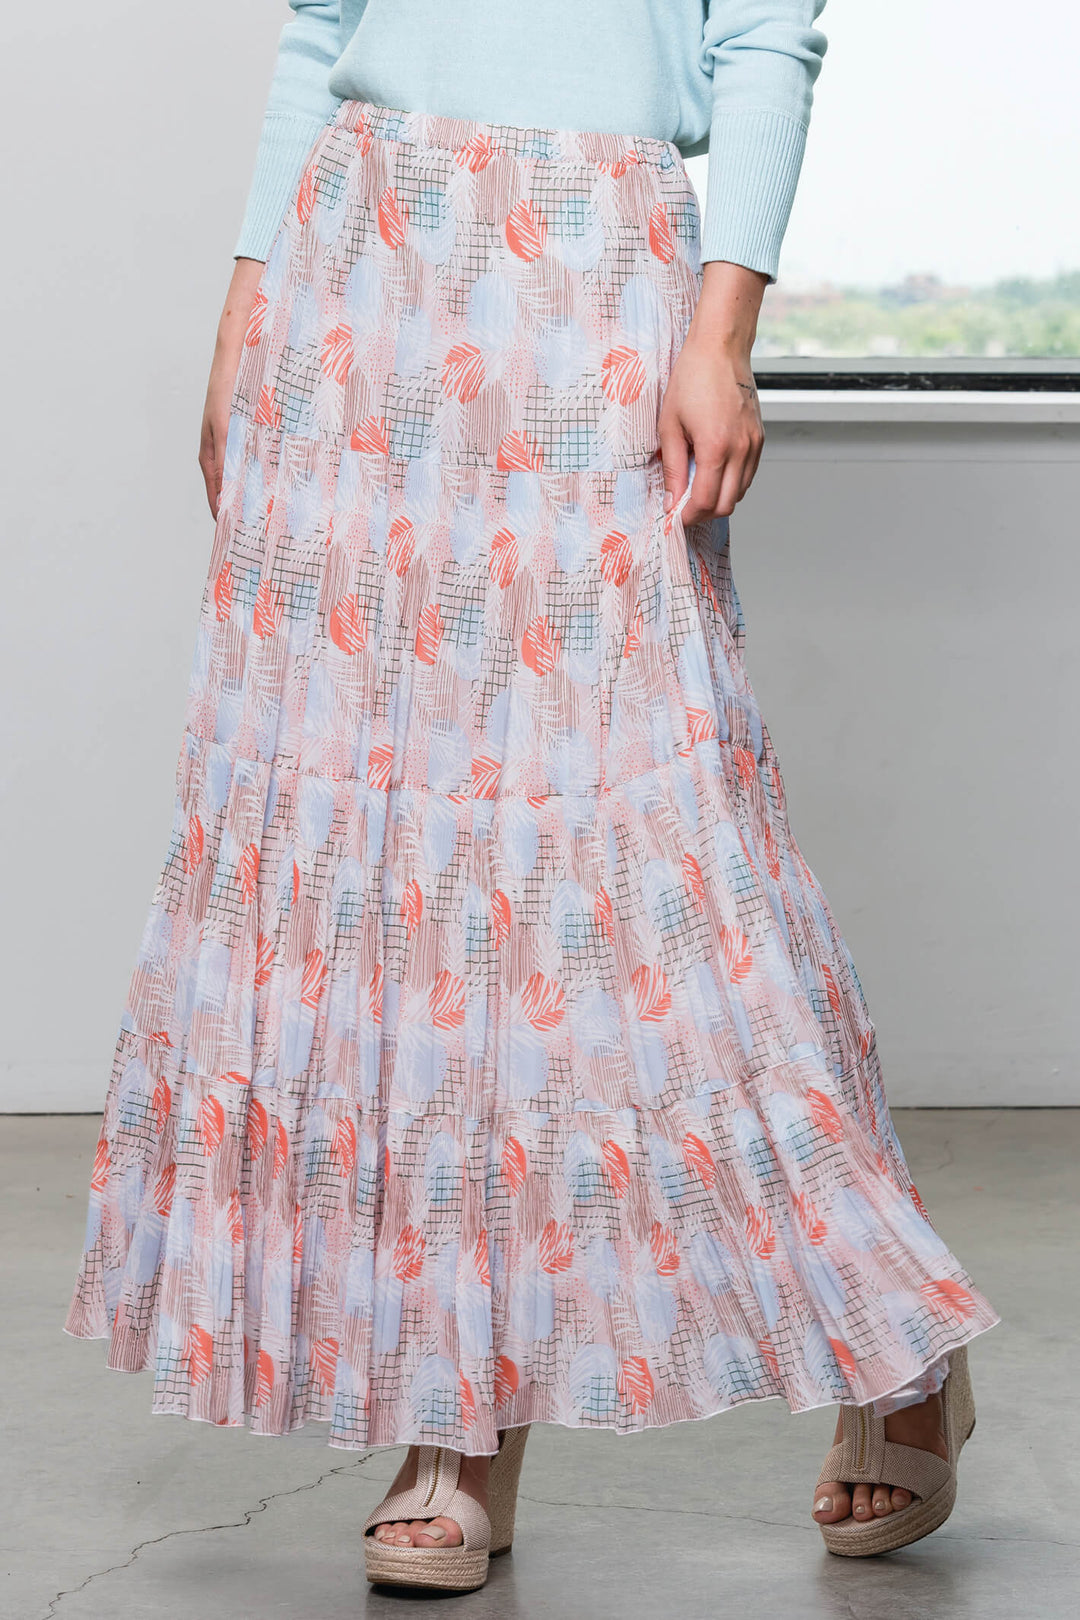 Alison Sheri A41061 Peach Palm Print Tiered Pleat Skirt - Experience Boutique